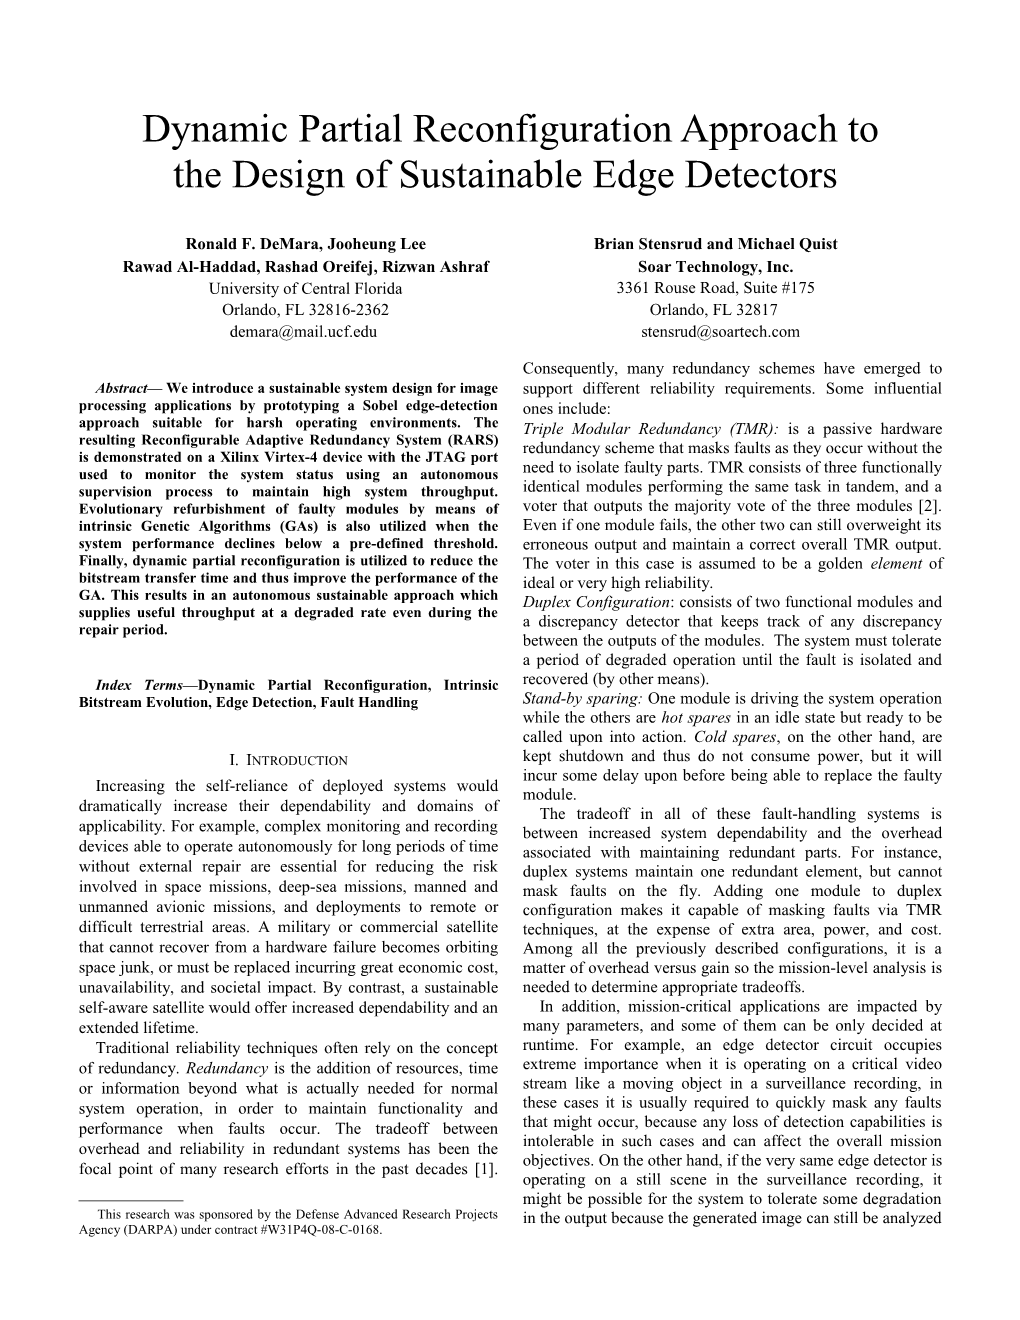 Dynamic Partial Reconfiguration Approach to the Design of Sustainable Edge Detectors